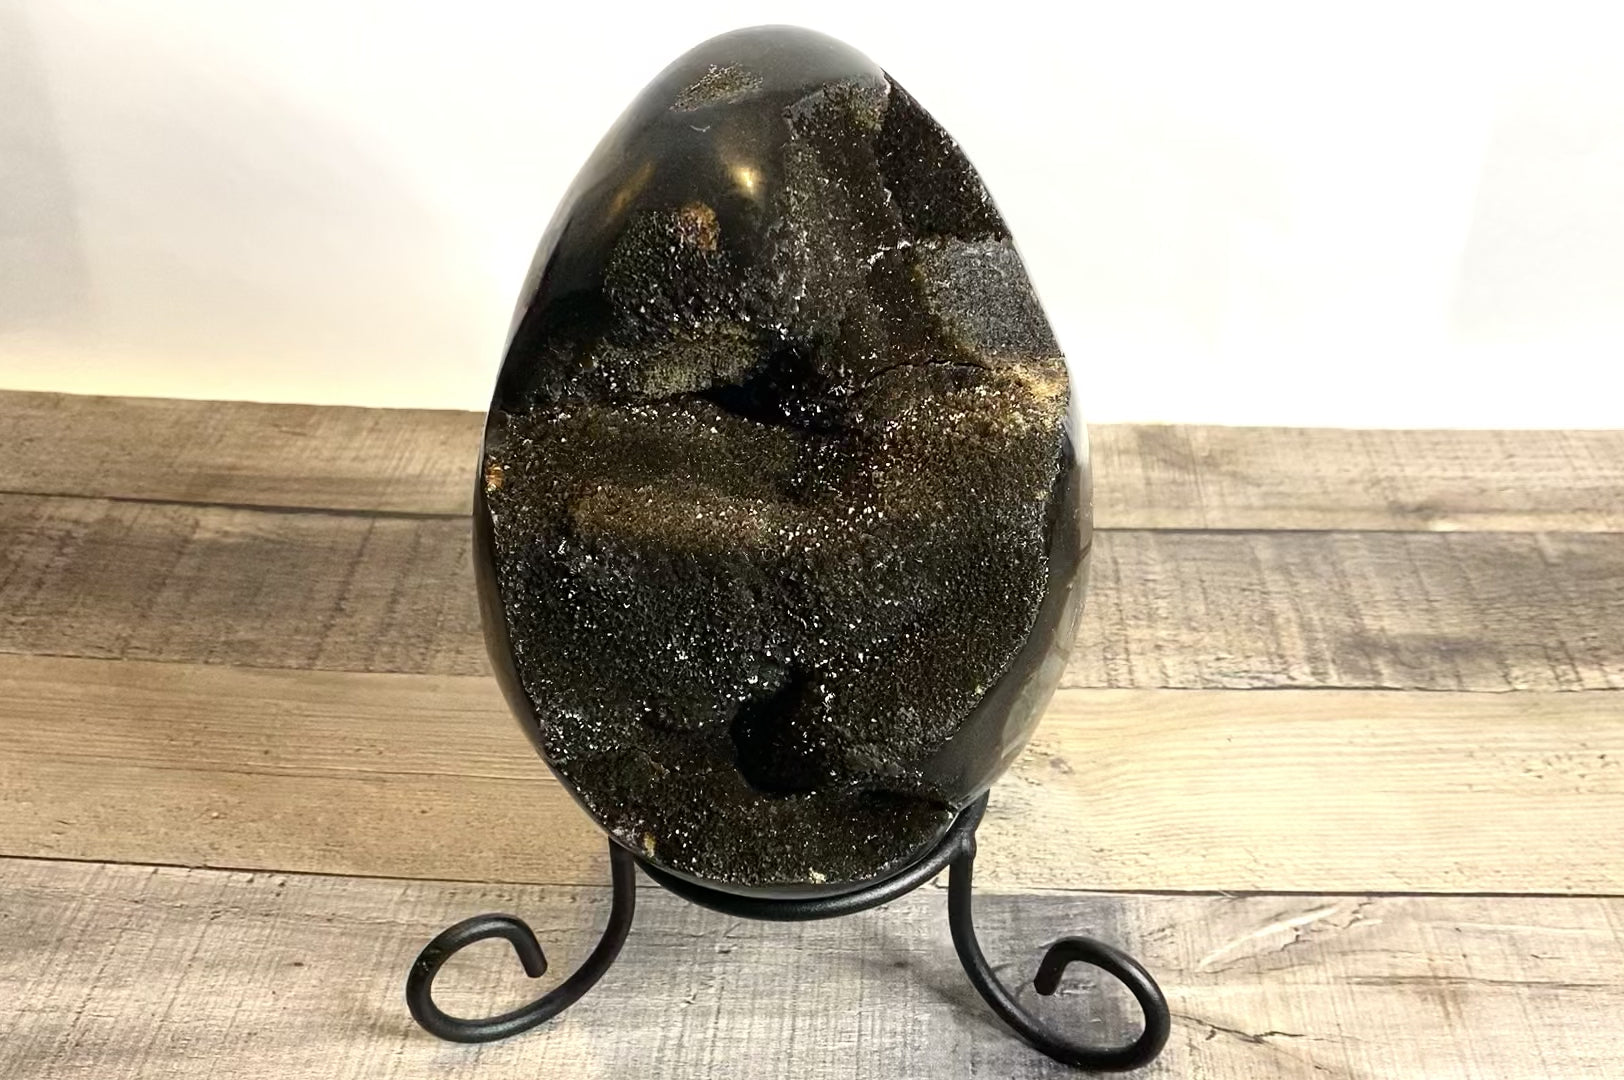 XL 7.25" tall Septarian Dragon Egg with Black Druzy, shown on its included wrought iron stand - Video